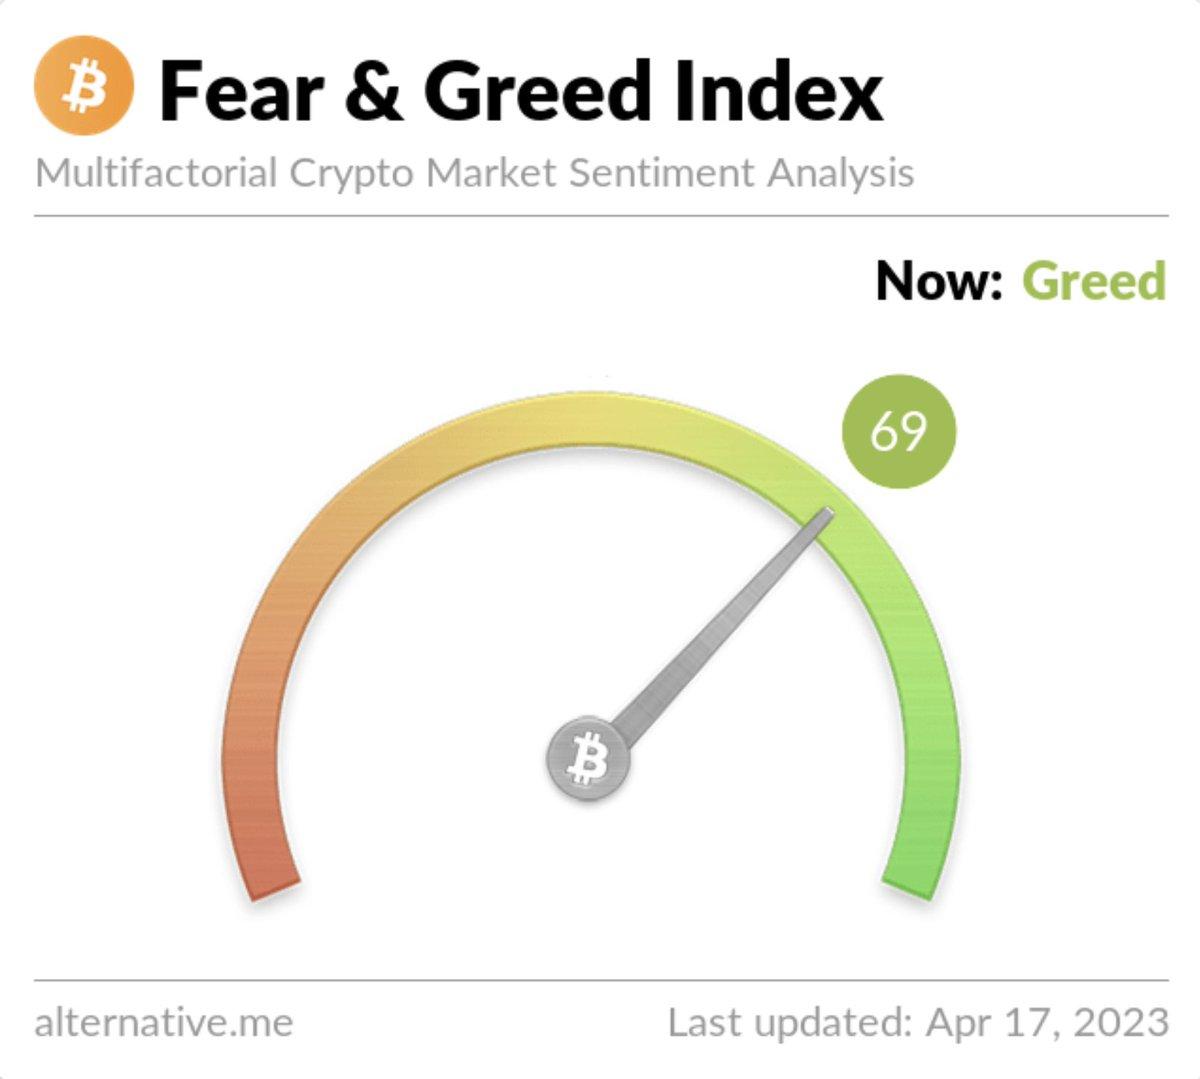 Bitcoin Fear and Greed Index is today at 69